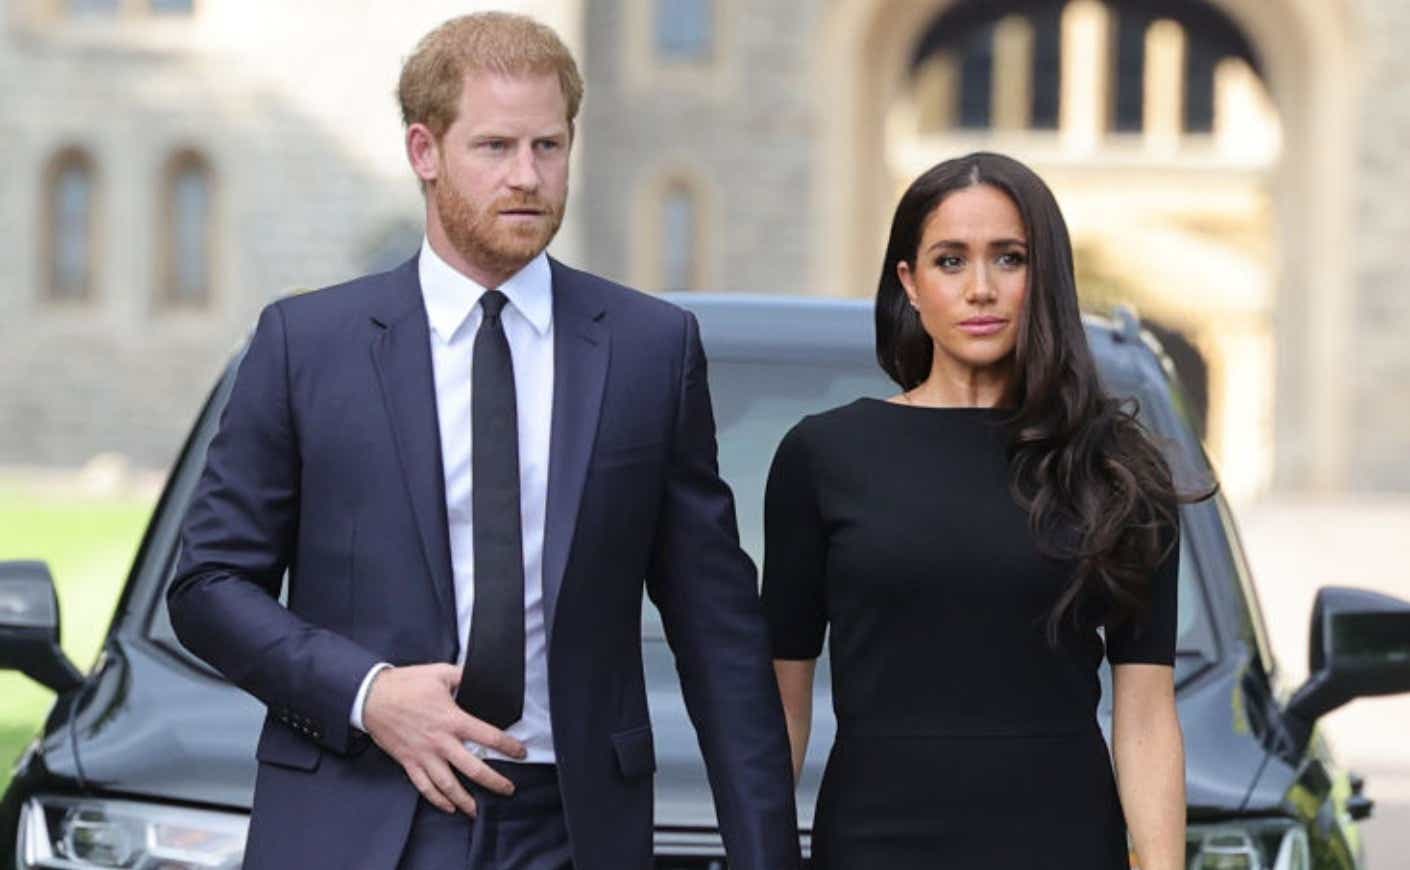 Meghan Markle and Prince Harry's Spotify Podcast Drama, Explained